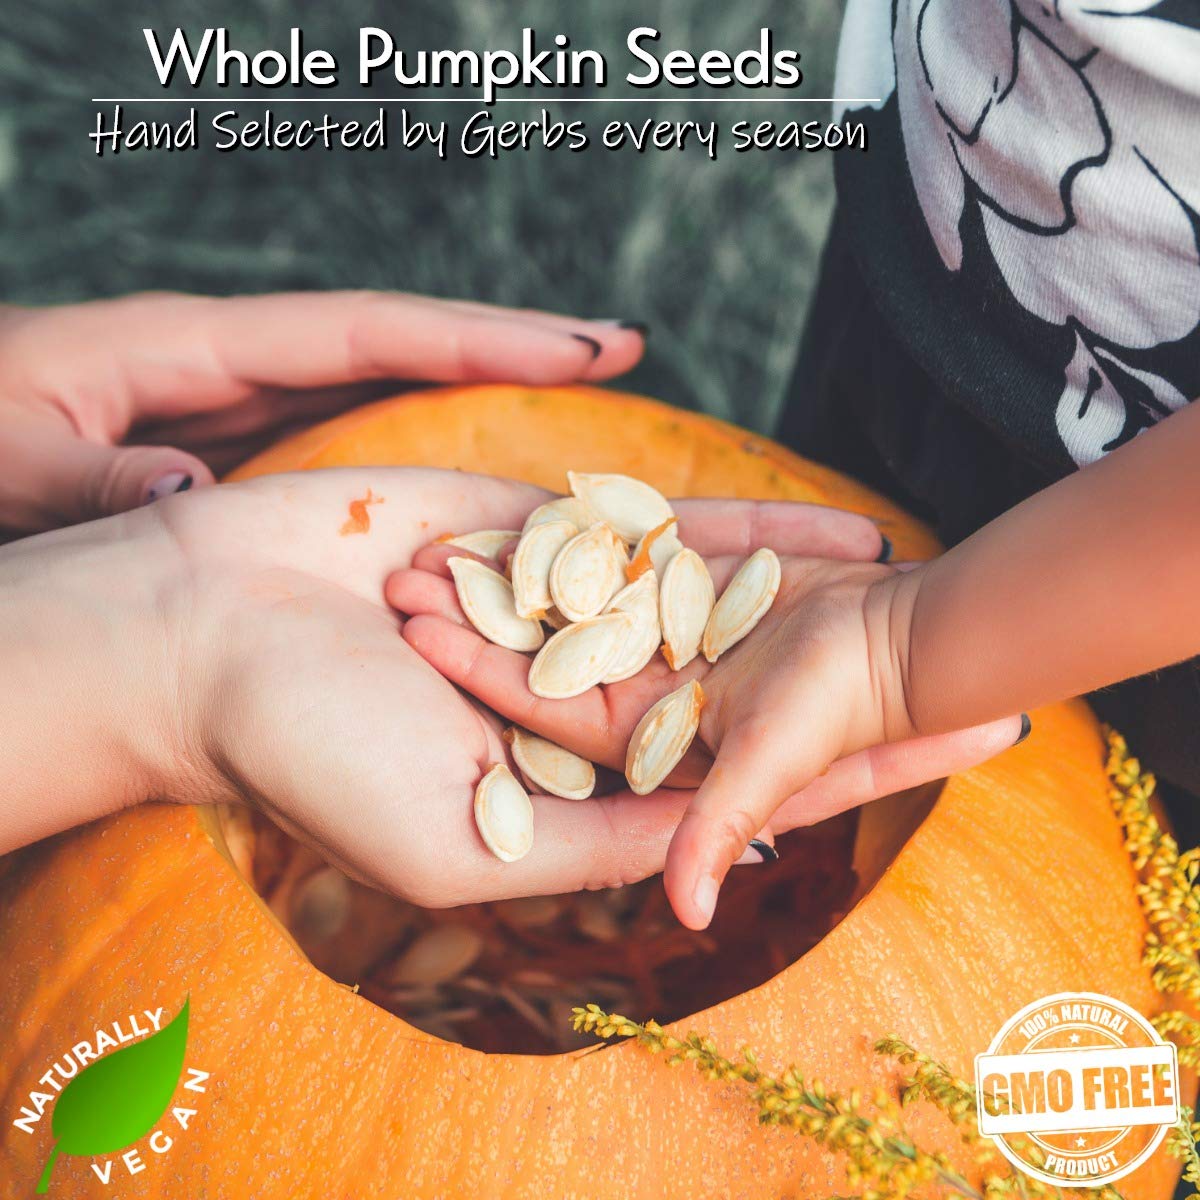 Sea Salted Roasted Pumpkin Seeds in Shell by Gerbs – 4 LBS - Top 11 Food Allergen Free & Non GMO - Premium Whole Pepitas, Product of USA : Grocery & Gourmet Food